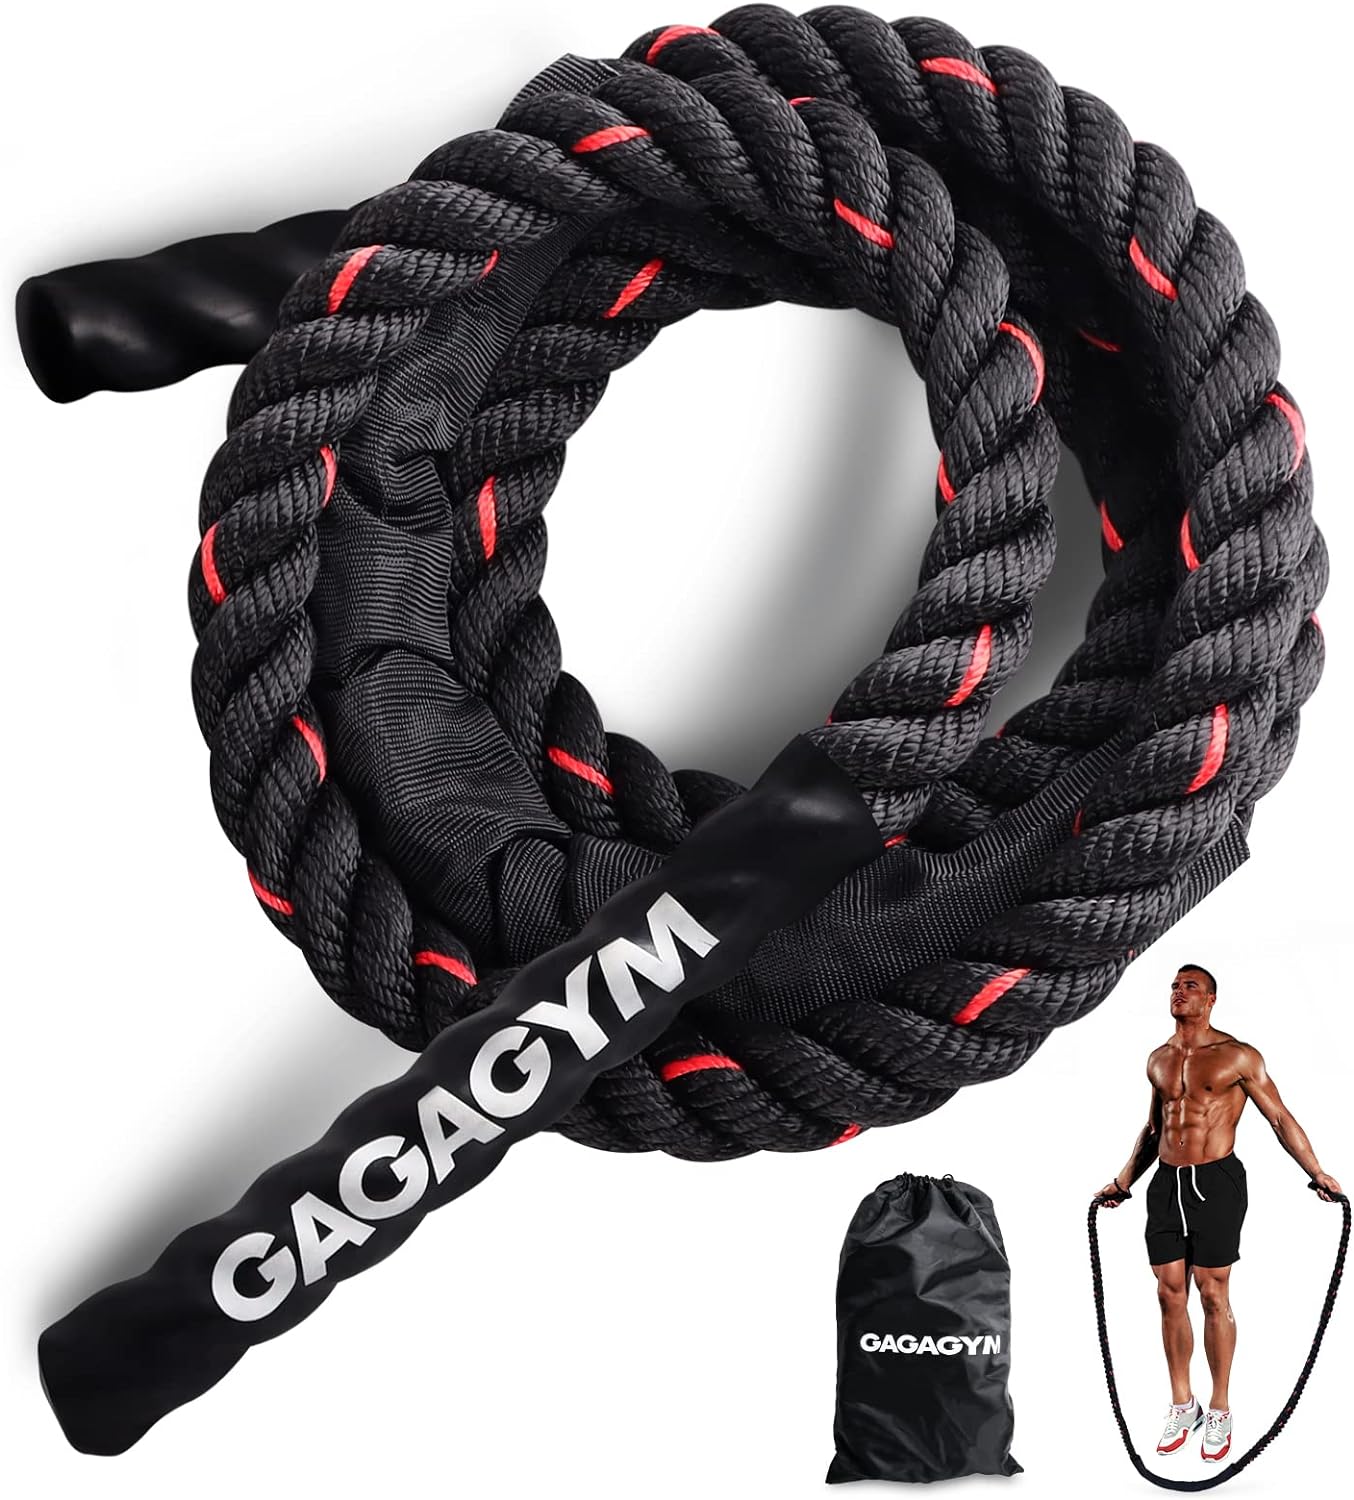 Weighted Jump Rope Review